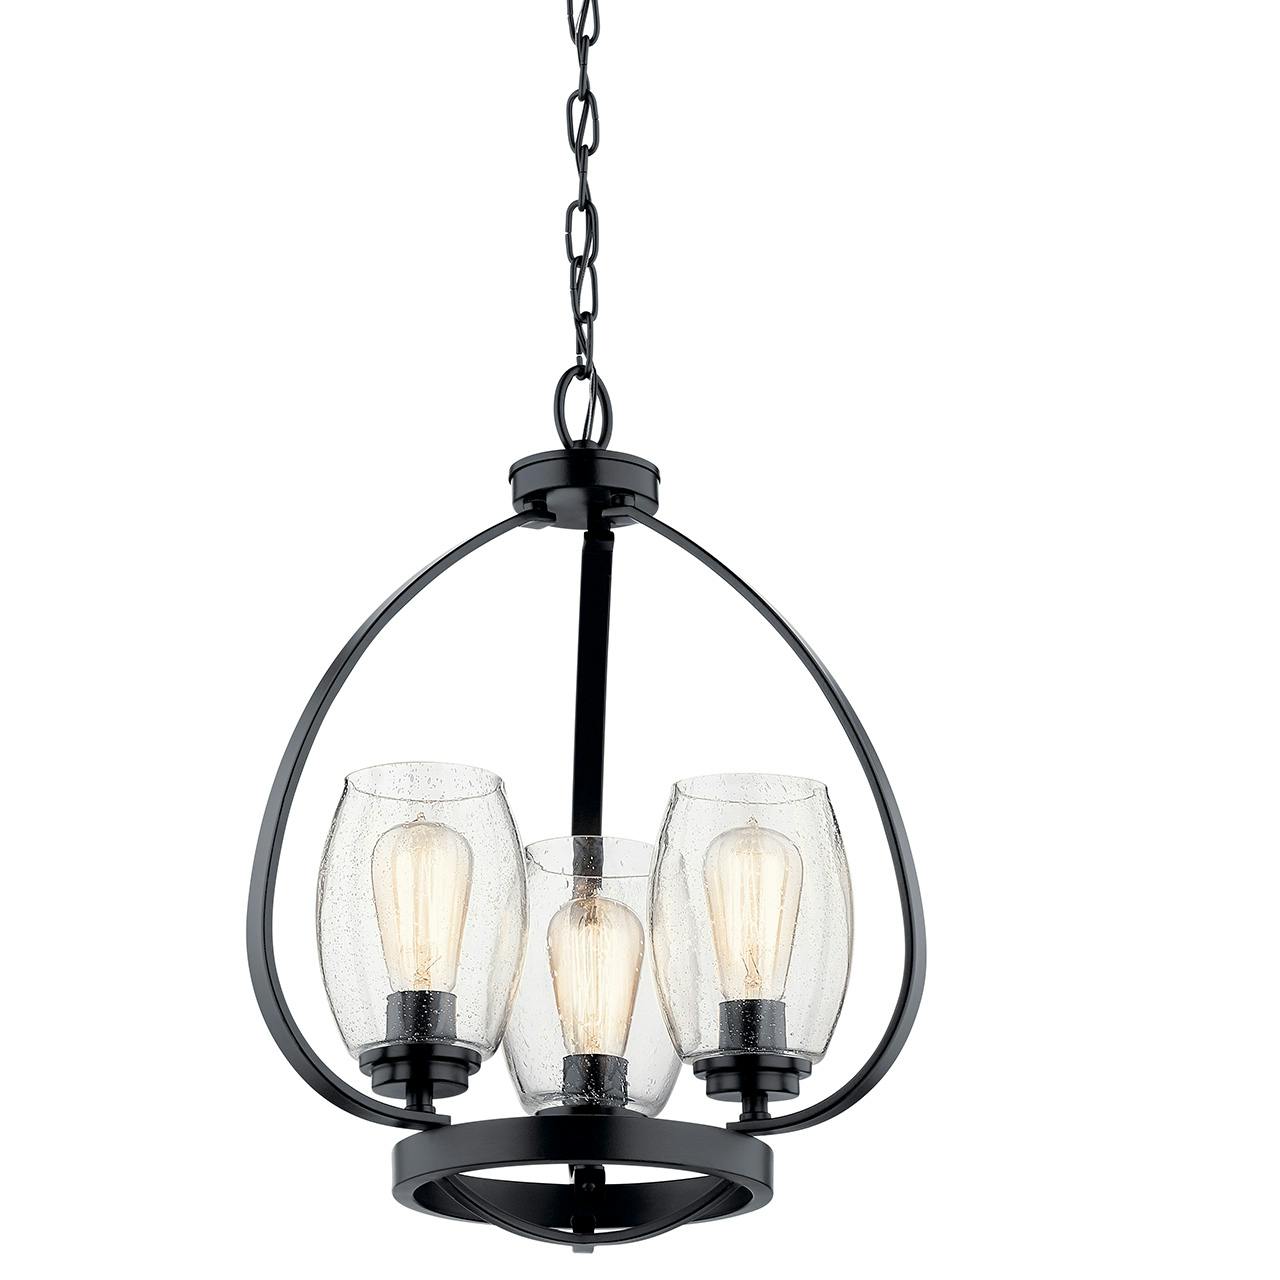 Tuscany 21" 3 Light Mini Chandelier Black without the canopy on a white background